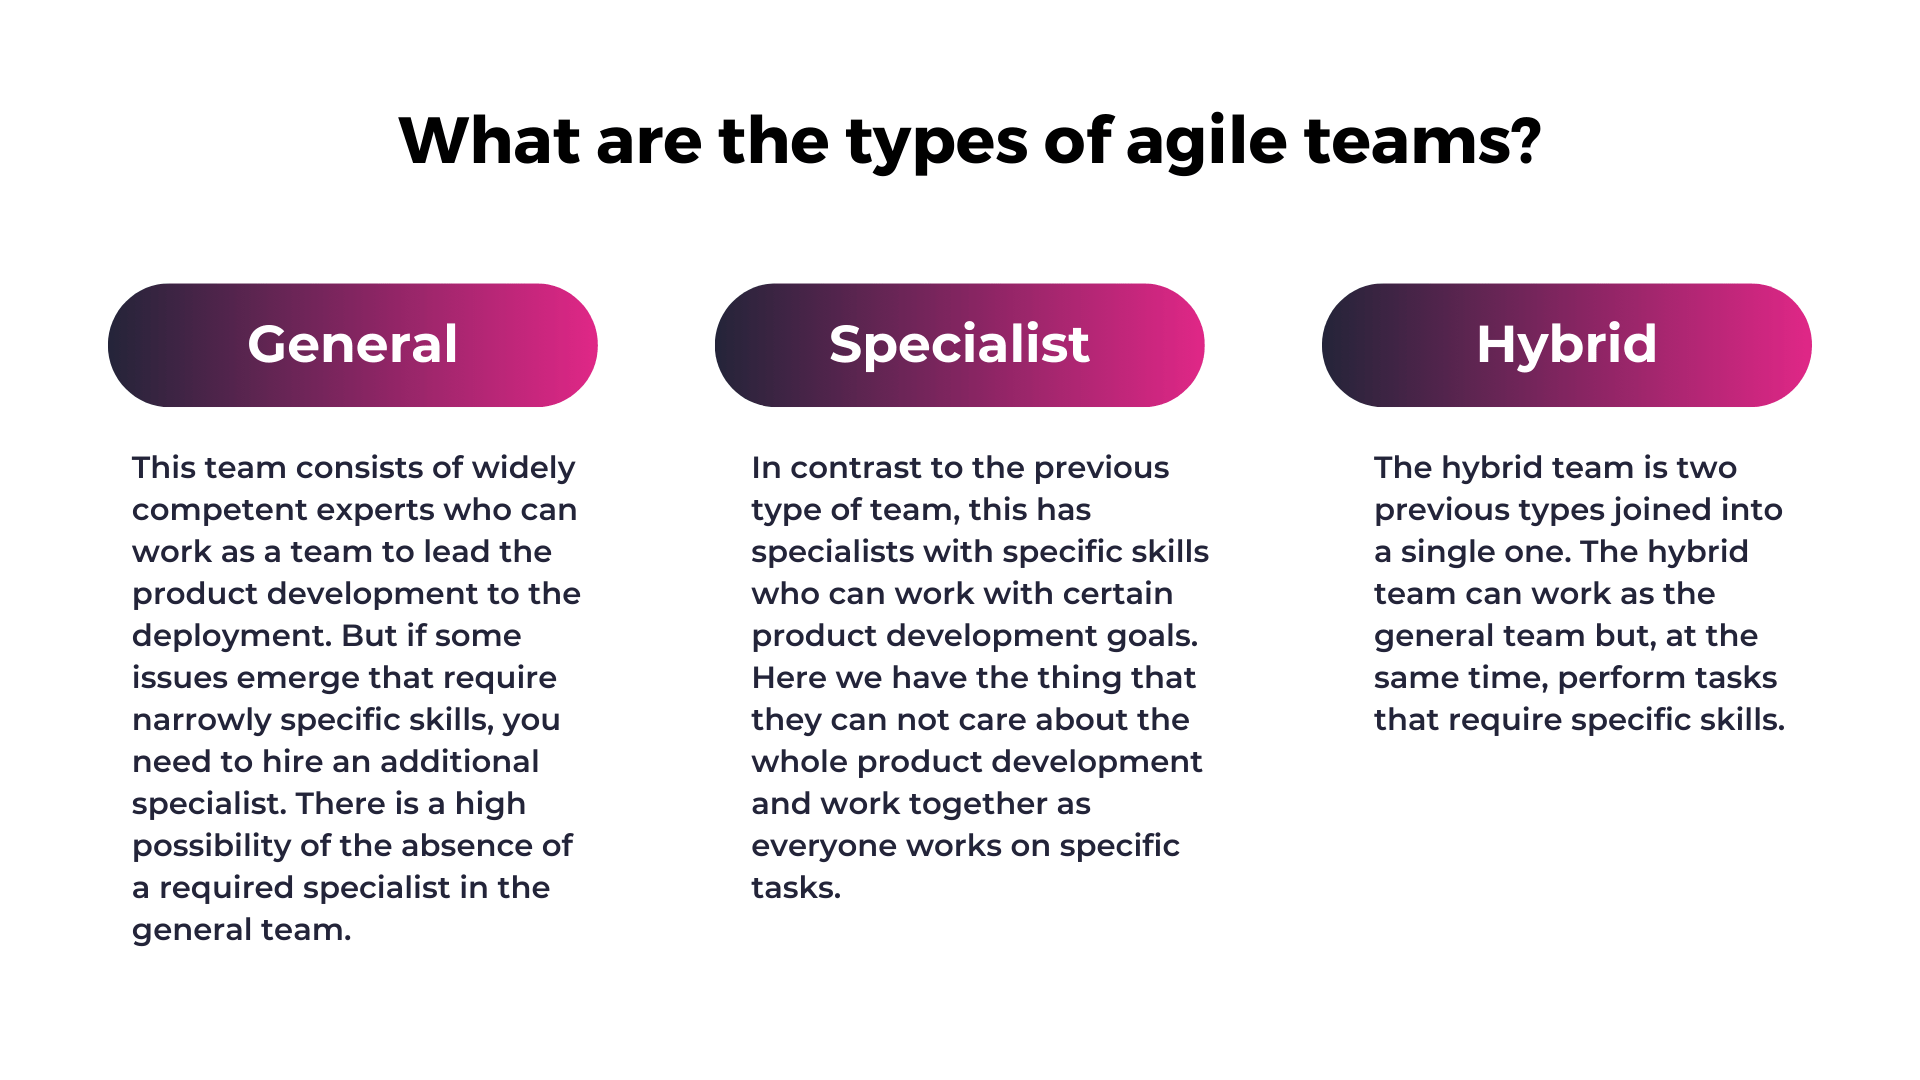 What are the types of agile teams?